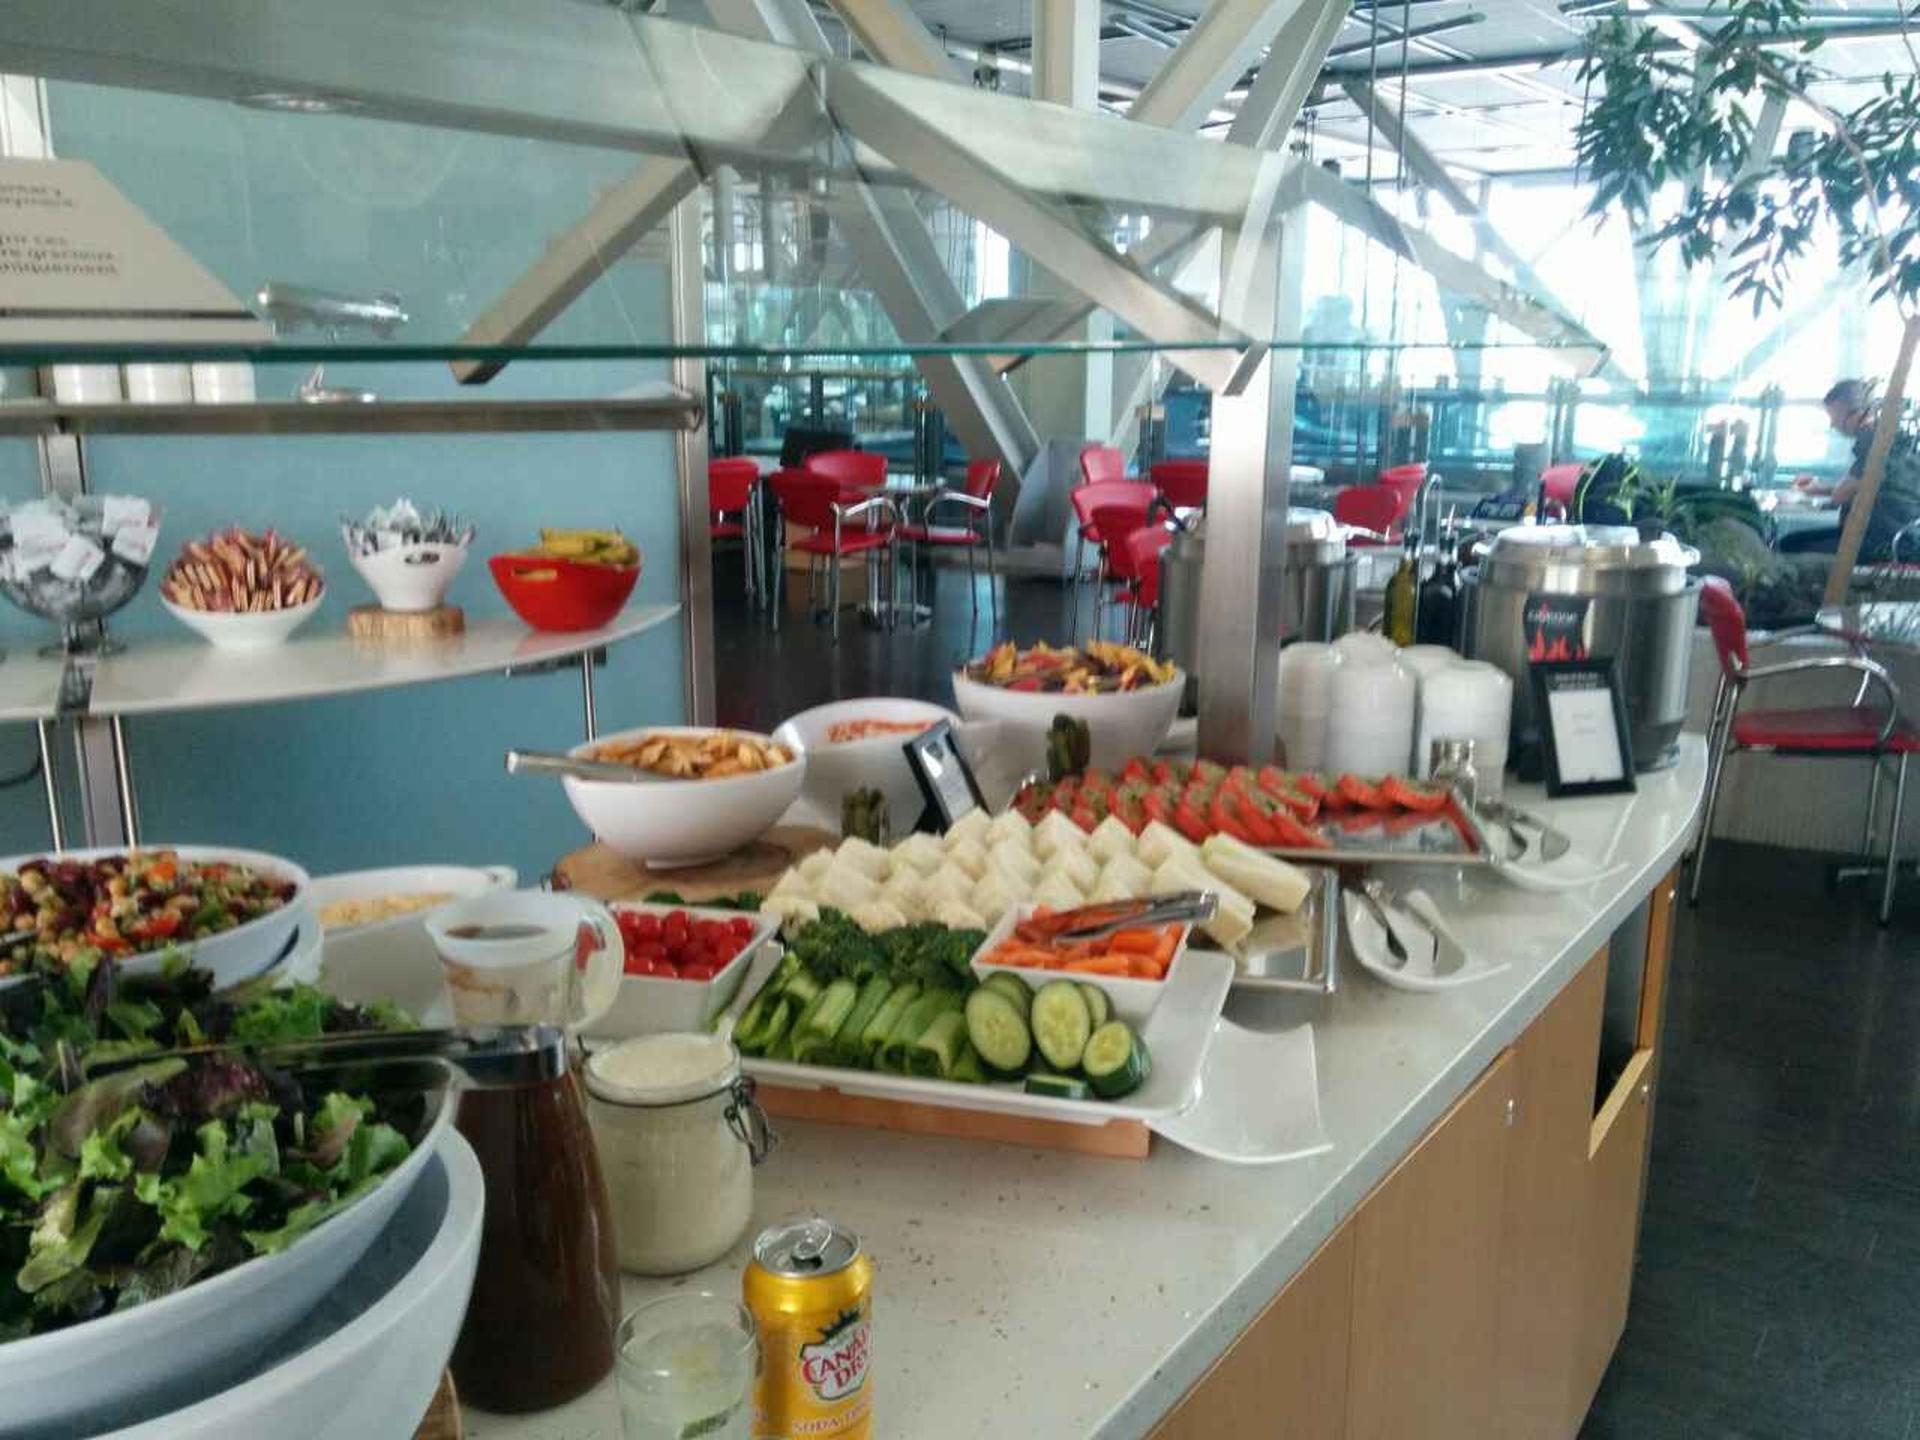 Air Canada Maple Leaf Lounge image 11 of 17